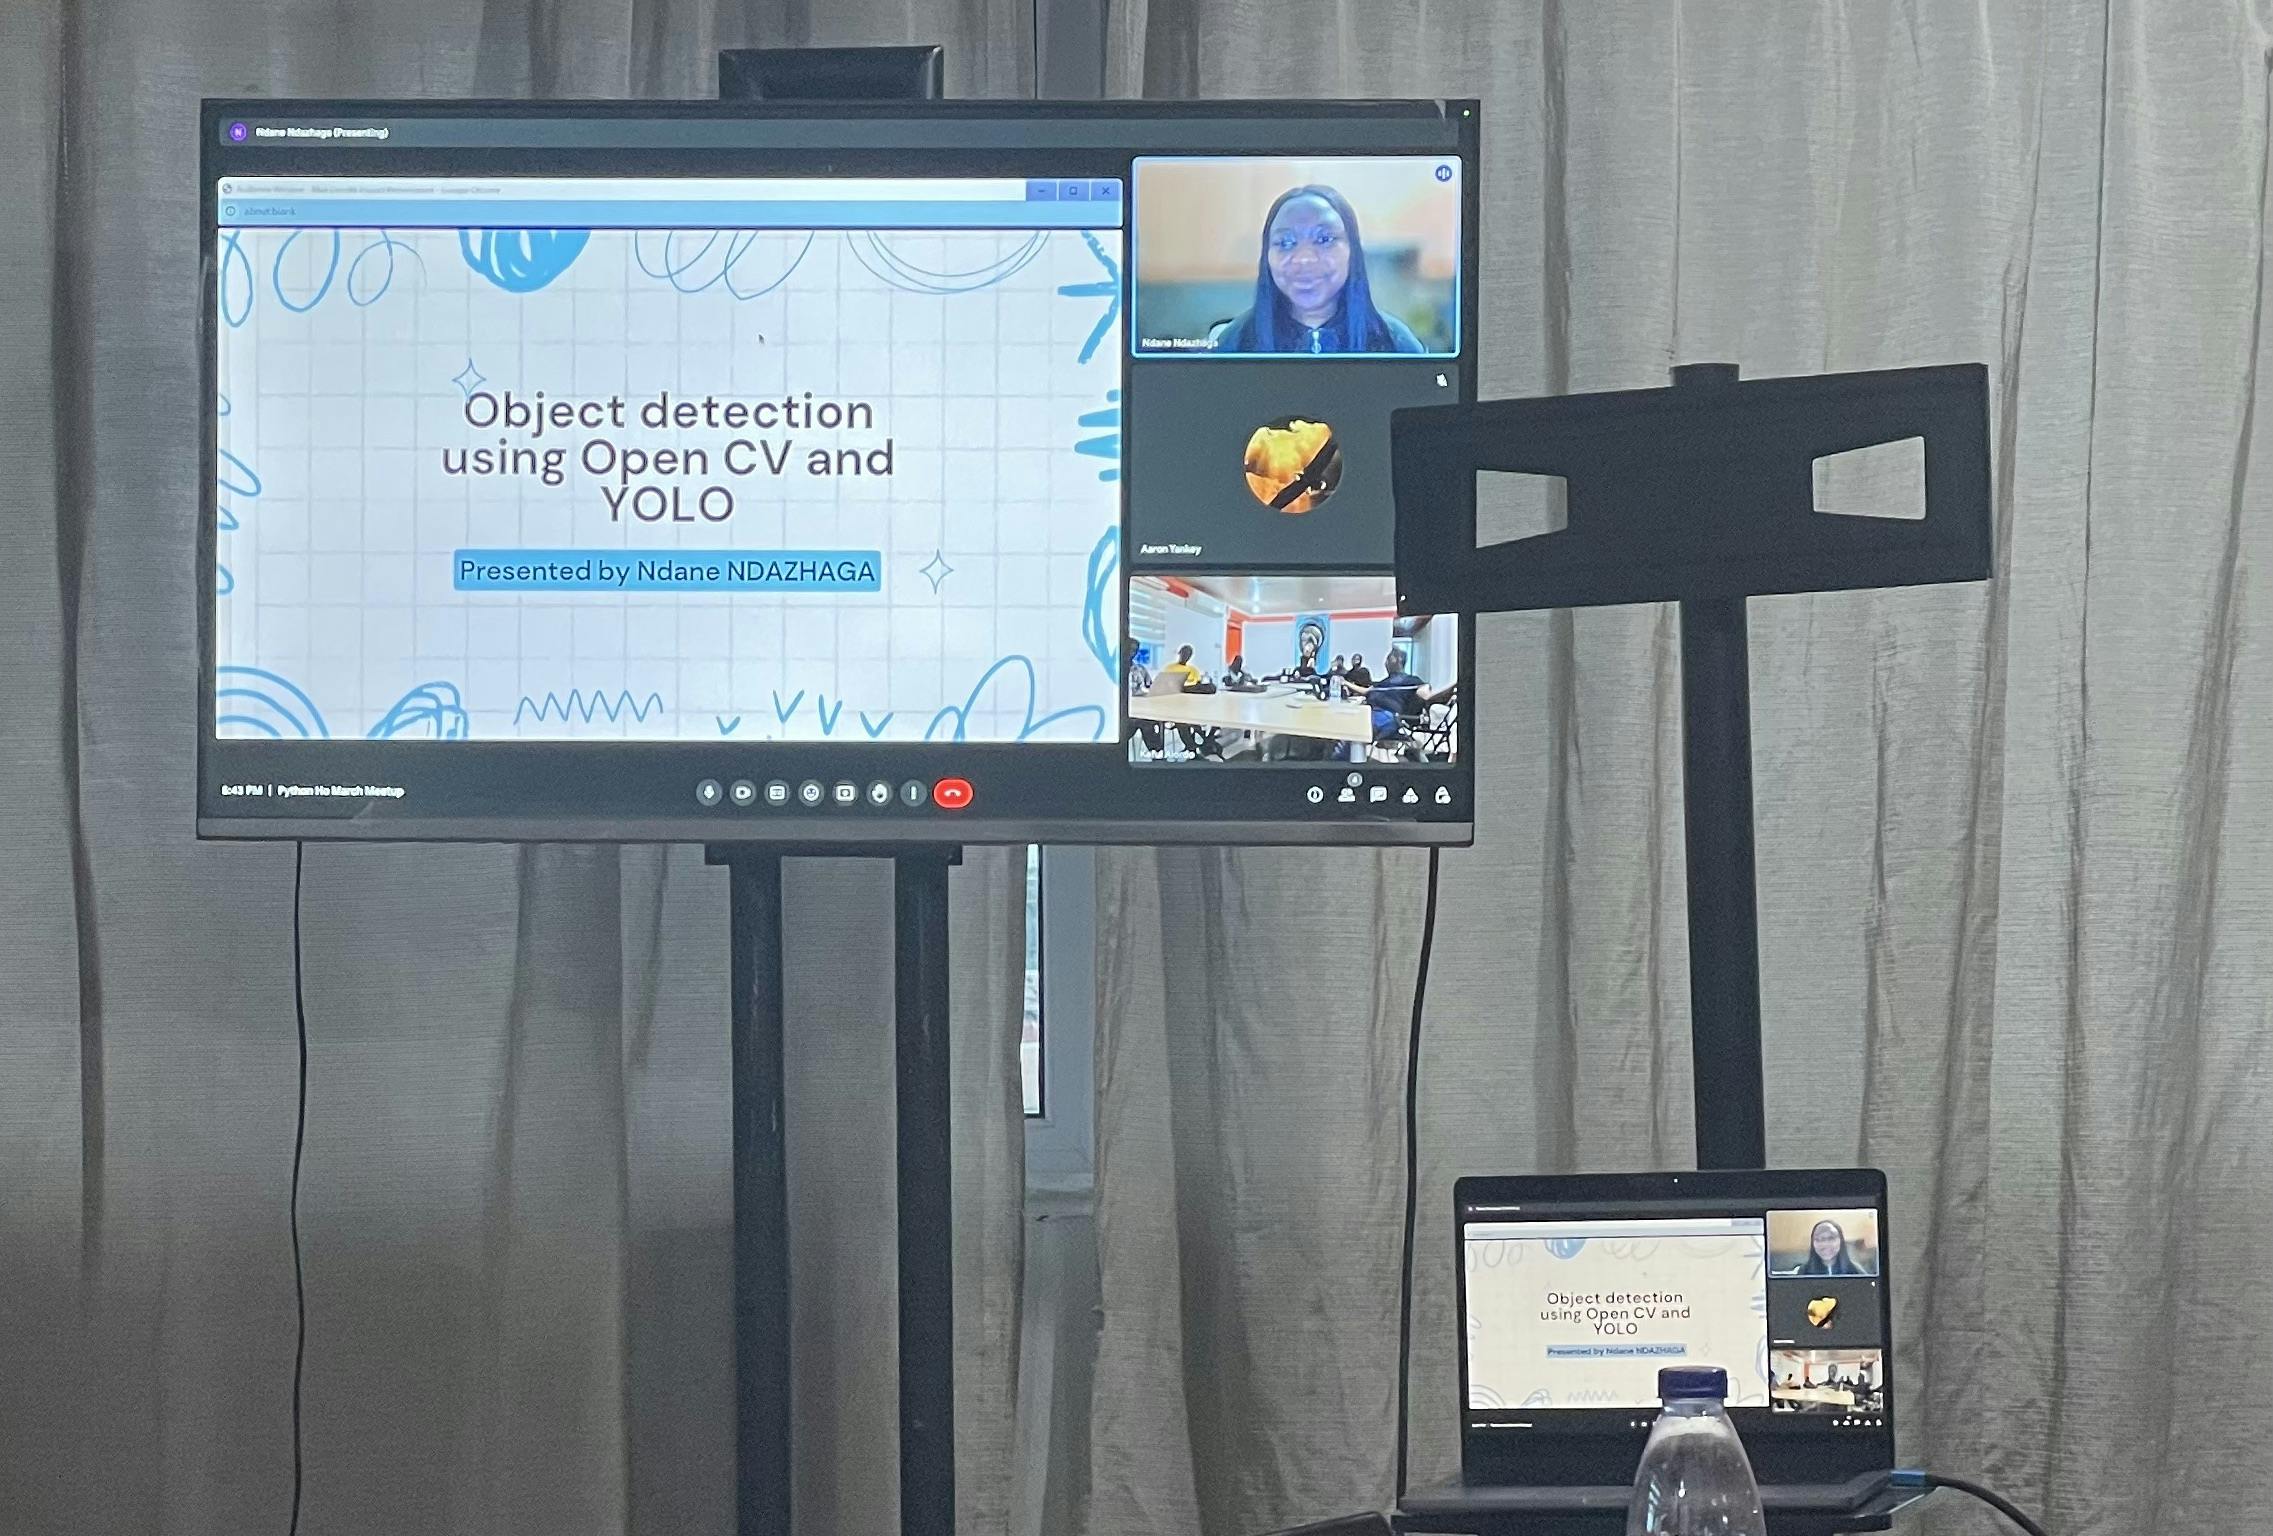 Ndane presenting her talk on Object detection using YOLO and OpenCV